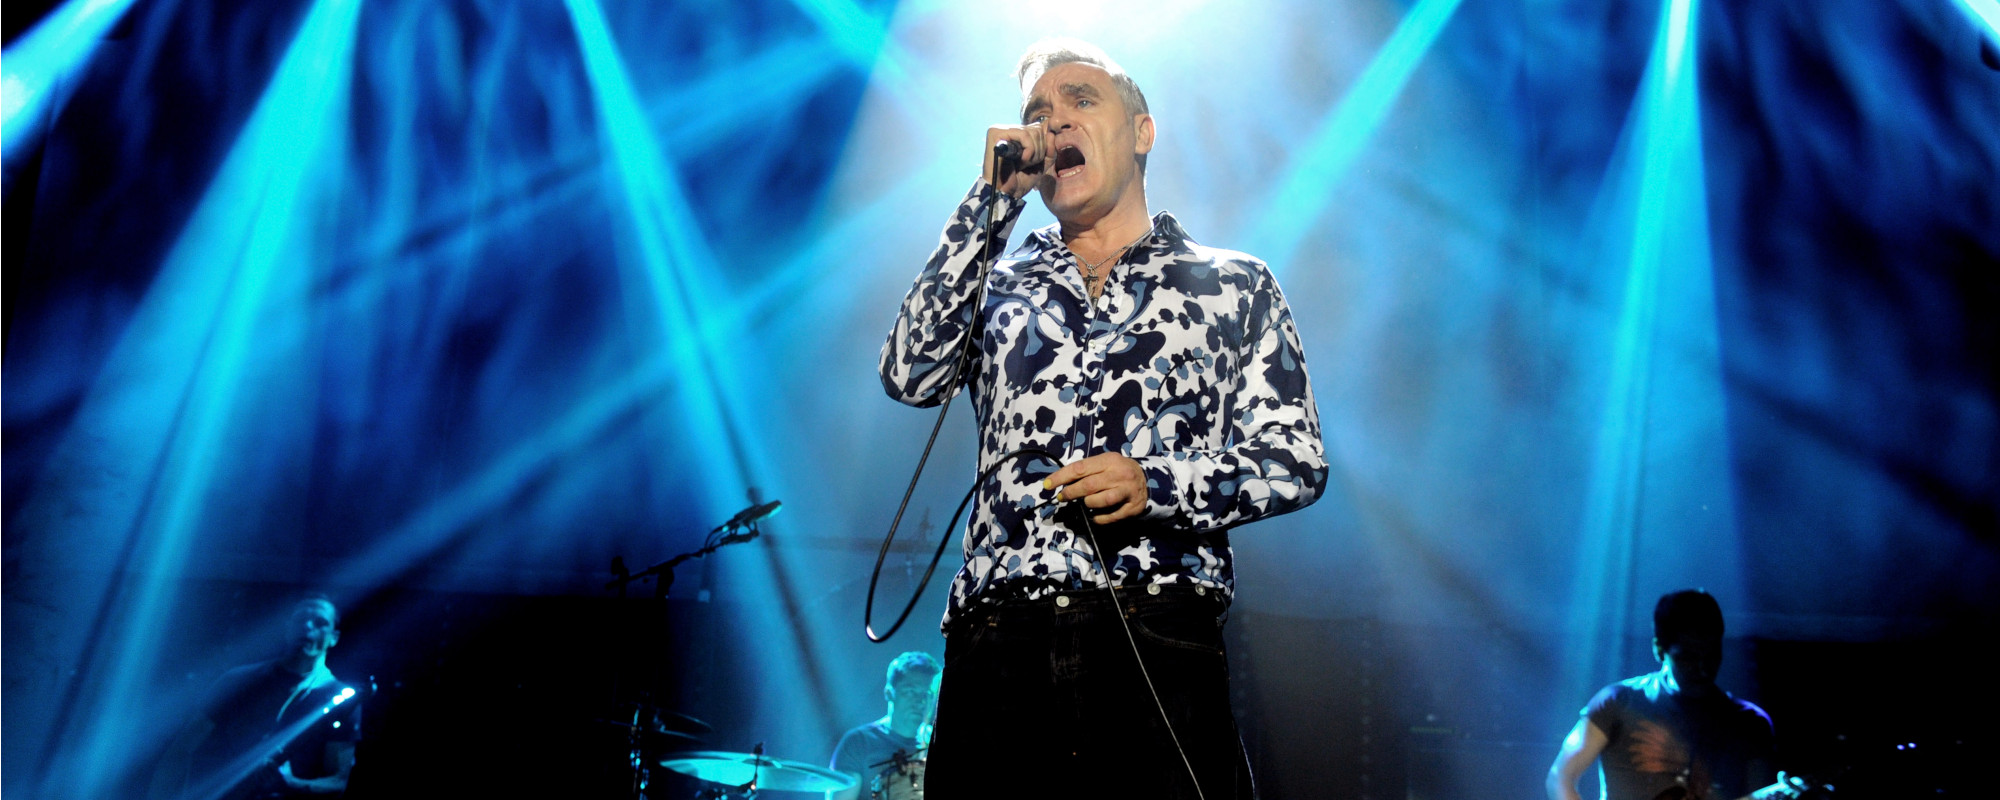 Morrissey “Receiving Medical Supervision,” Cancels 20th Anniversary ‘You Are the Quarry’ Shows in Since-Deleted Post